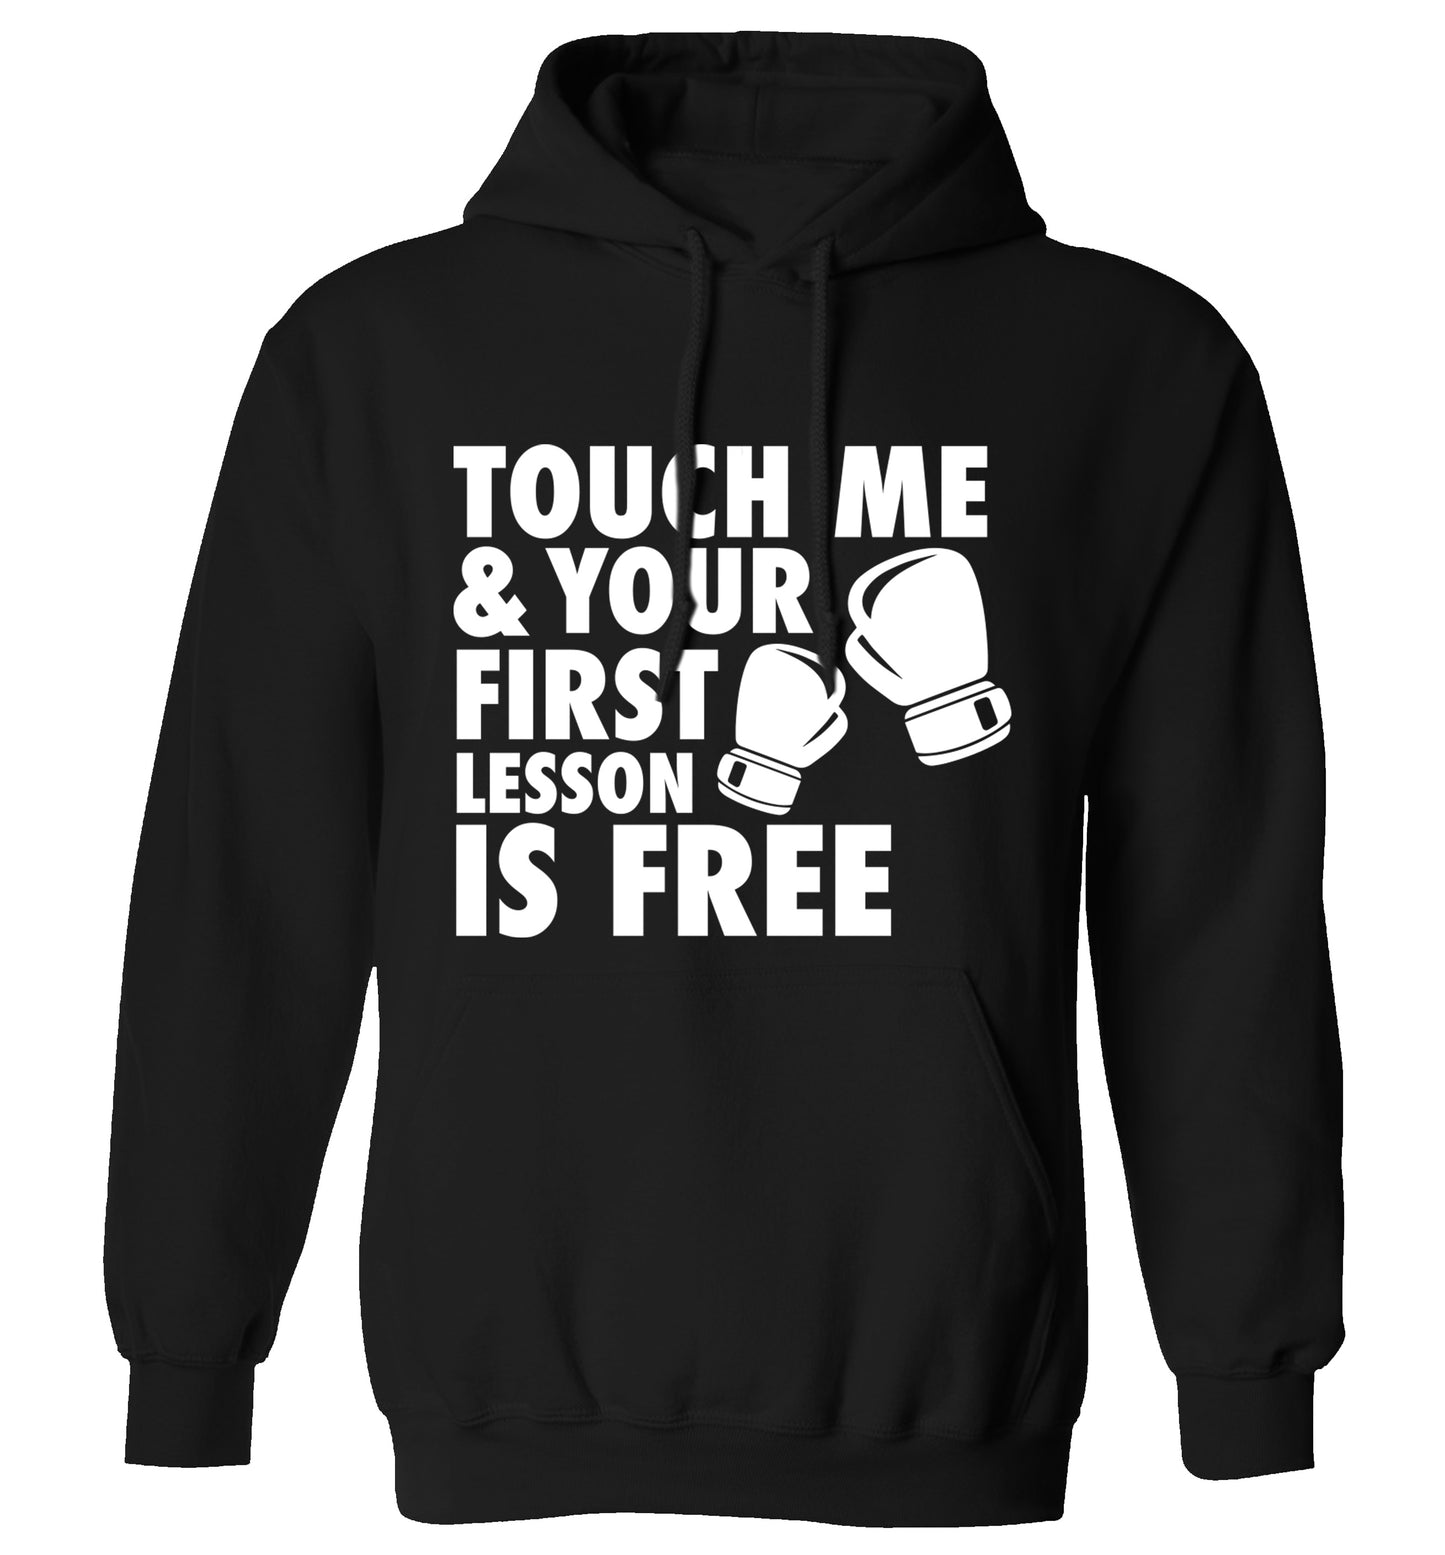 Touch me and your First Lesson is Free  adults unisex black hoodie 2XL